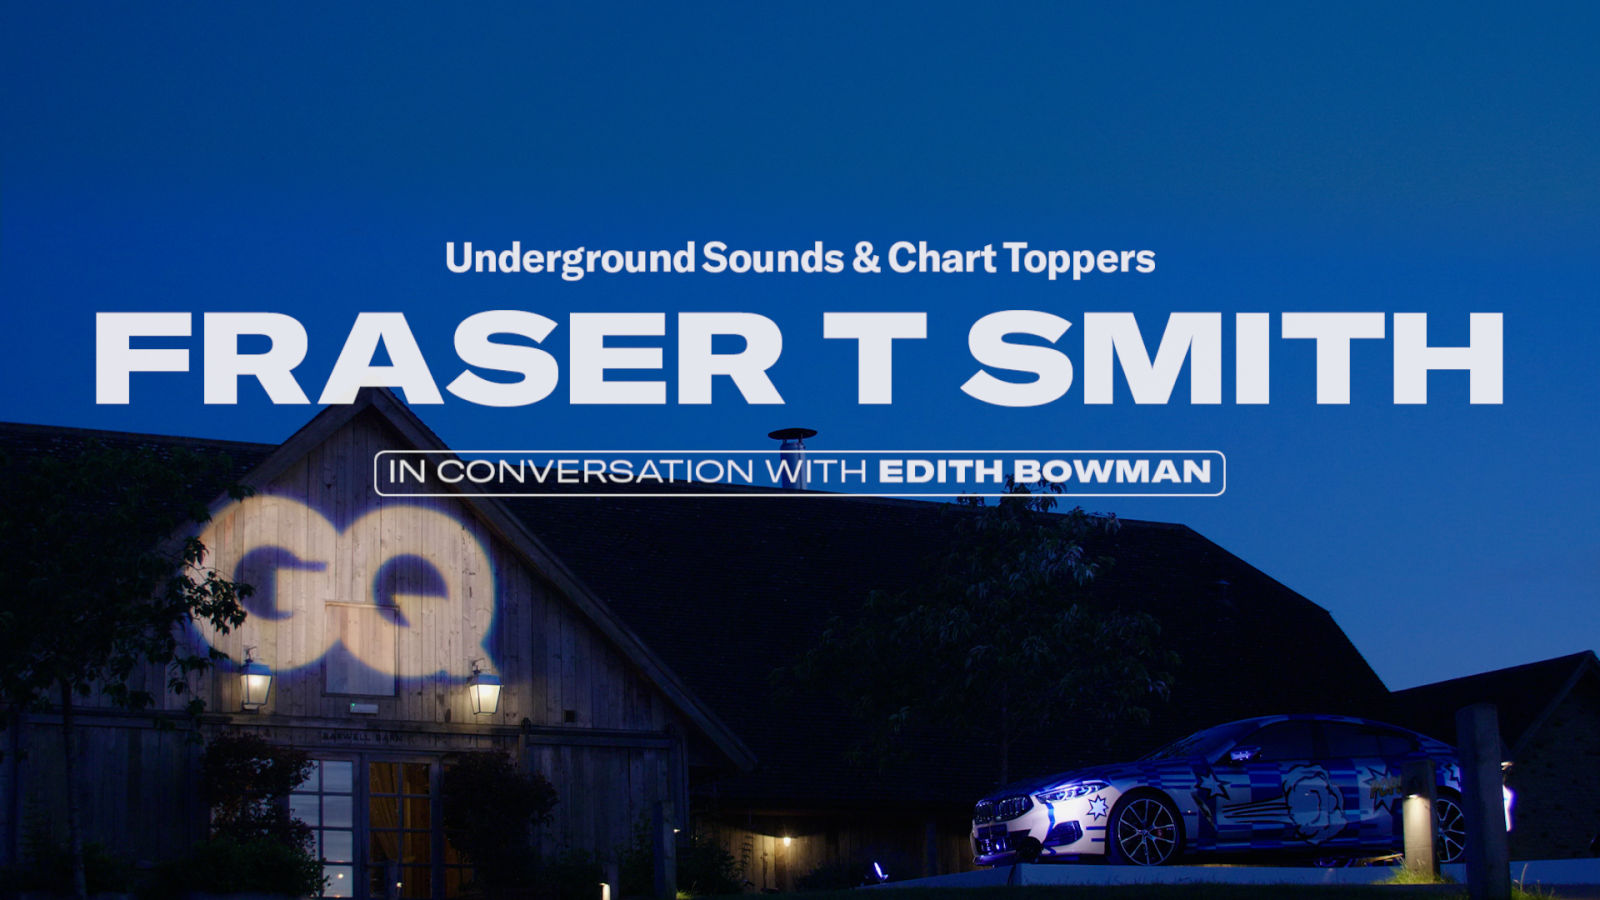 Fraser T Smith On Underground Sounds and Chart Toppers 